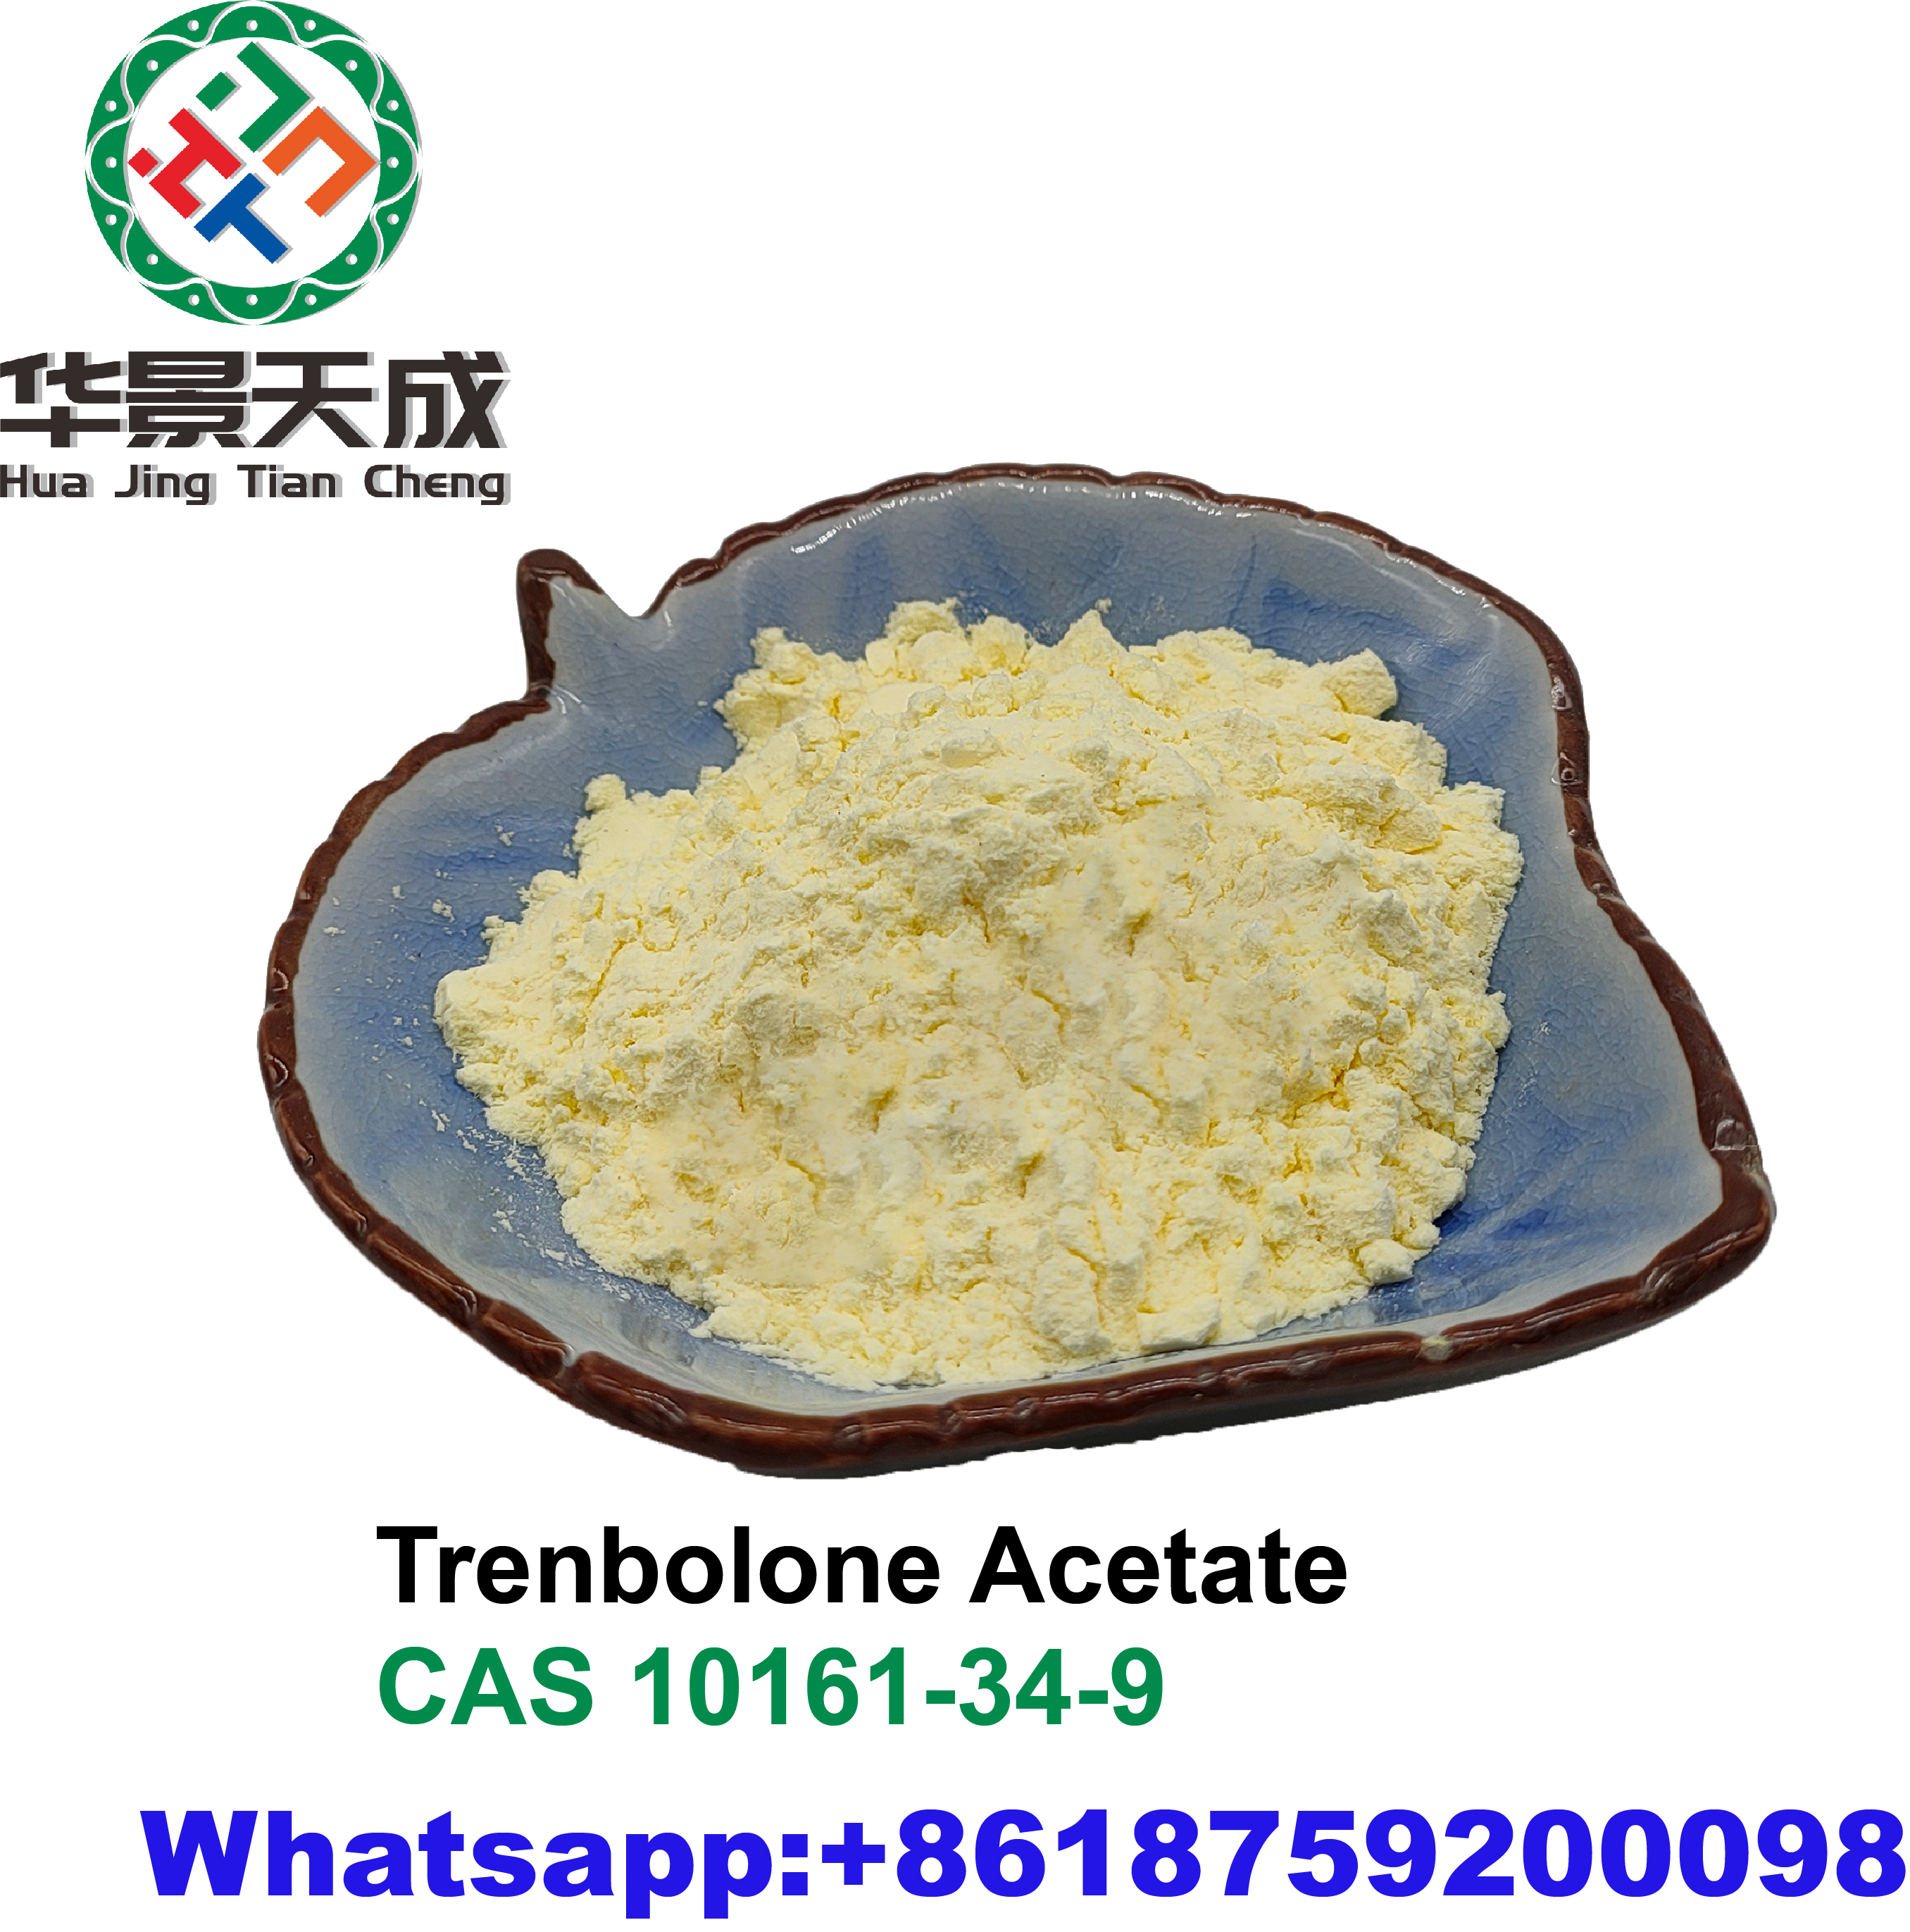 Trenbolone Acetate Androgenic Anabolic Steroids Bodybuilding Cutting Cycle Fat Loss Tren A CasNO.10161-34-9 Featured Image